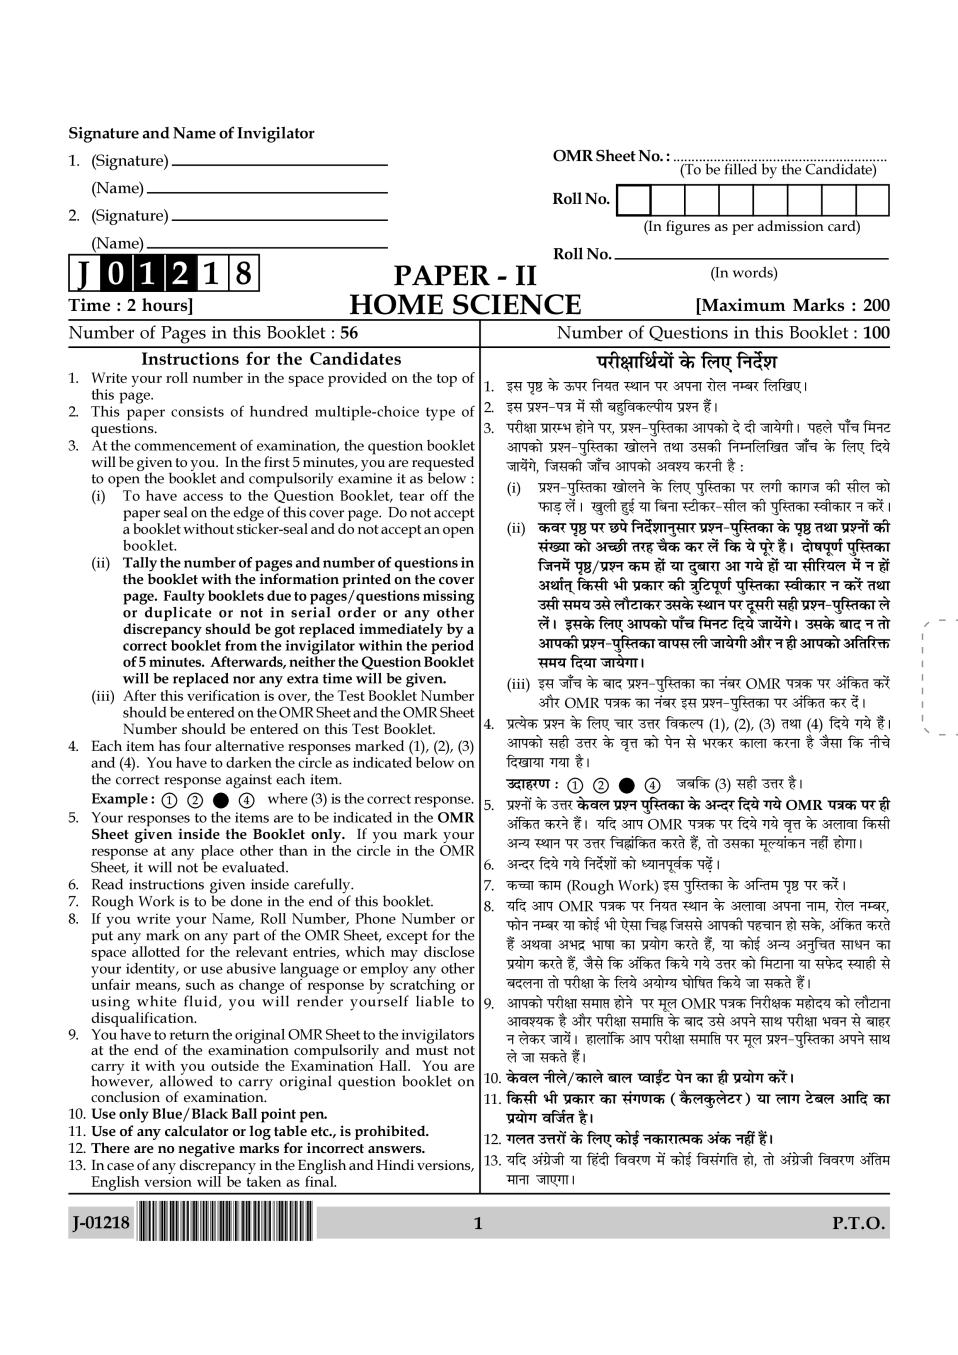 UGC NET Home Science Question Paper 2018 - Page 1